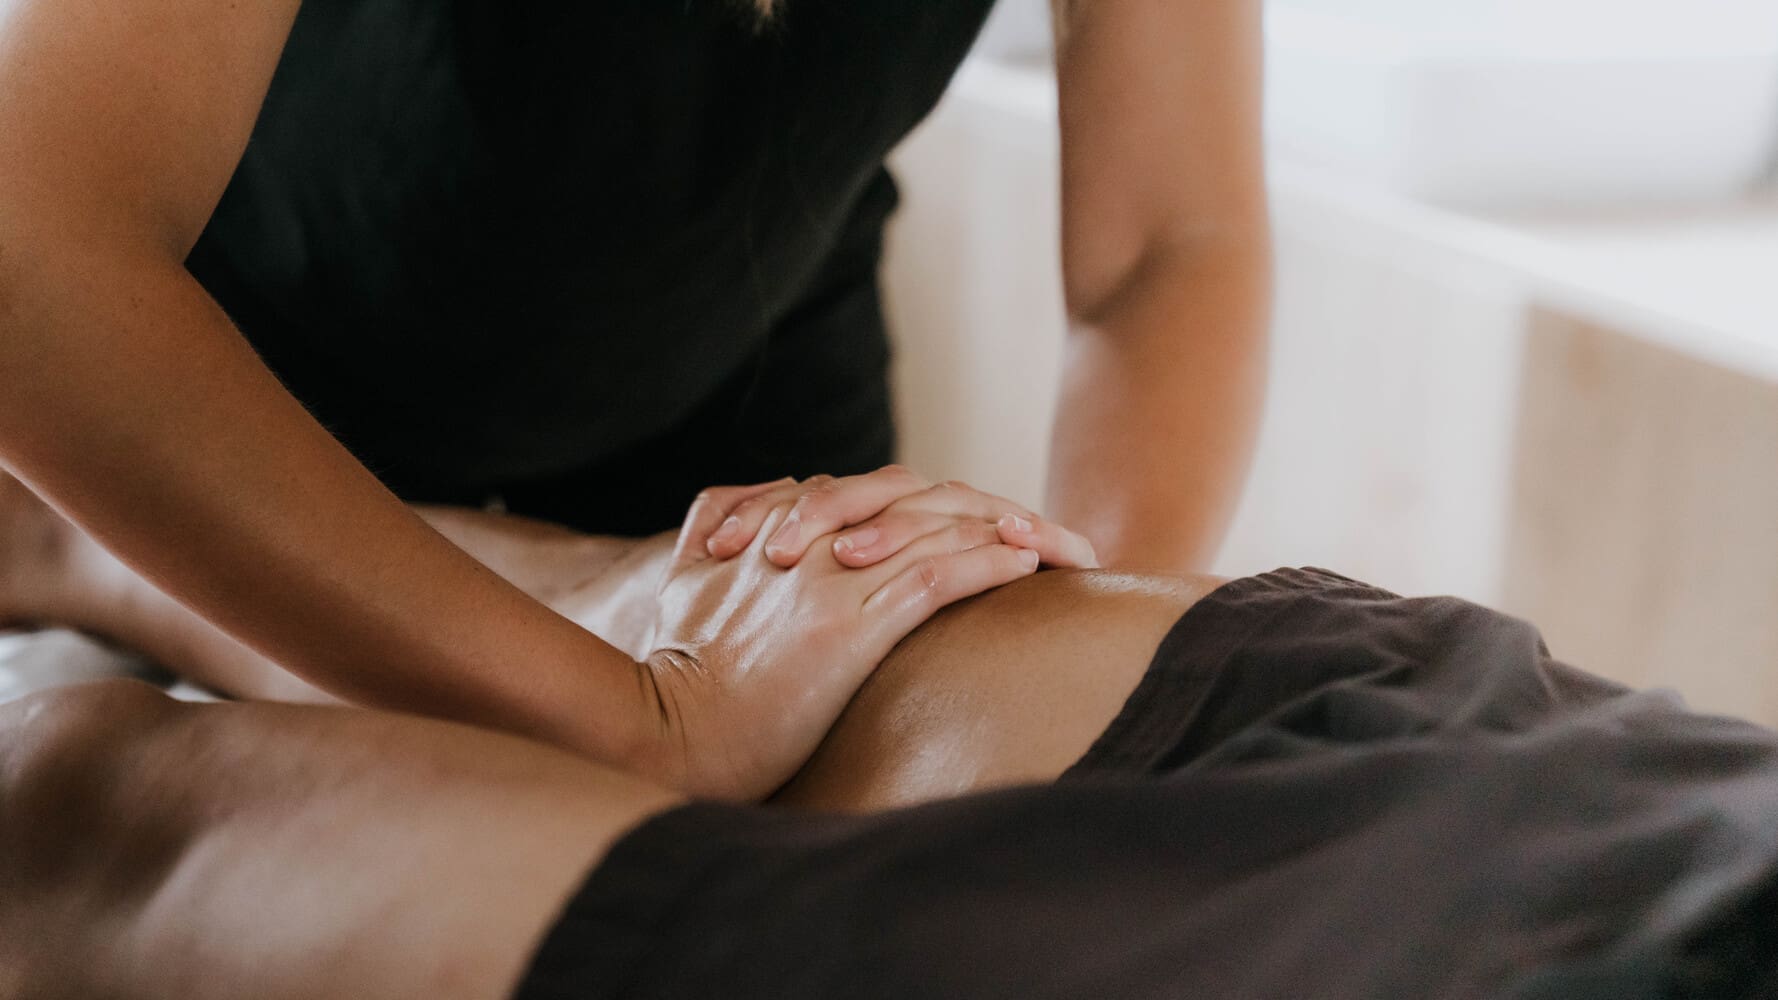 Knee Injury soft tissue massage by our physiotherapists and osteopaths at our healthcare clinic near Sevenoaks